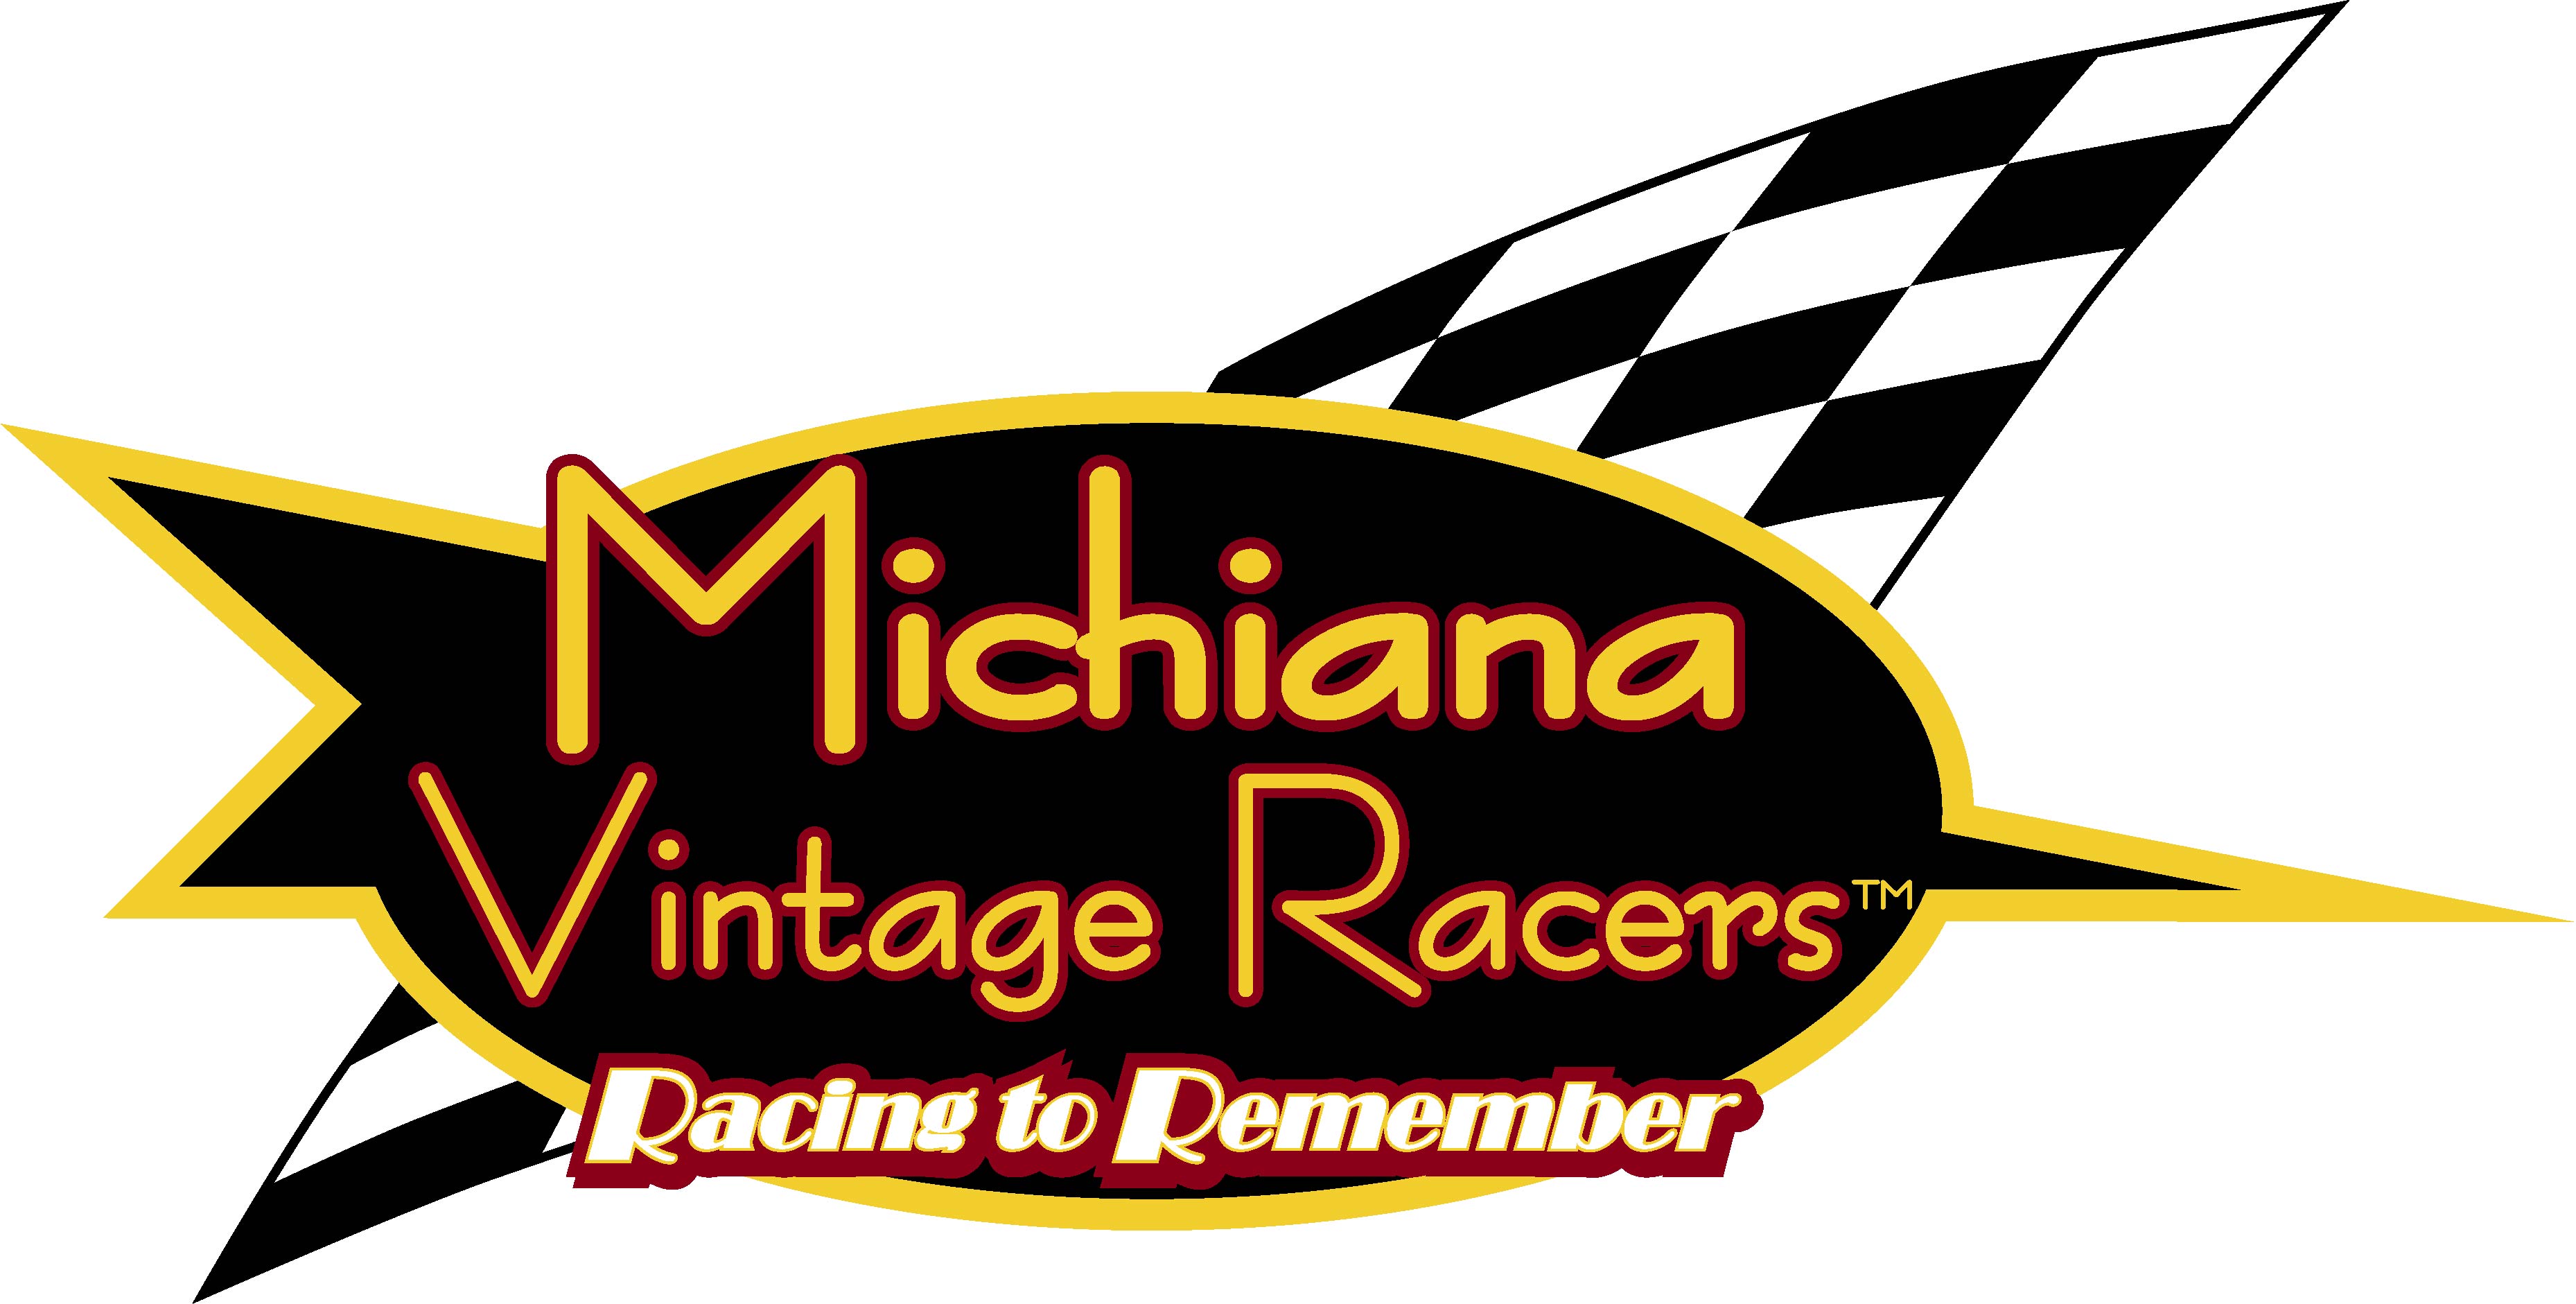 Michiana Vintage Racers-"Racing to Remember"